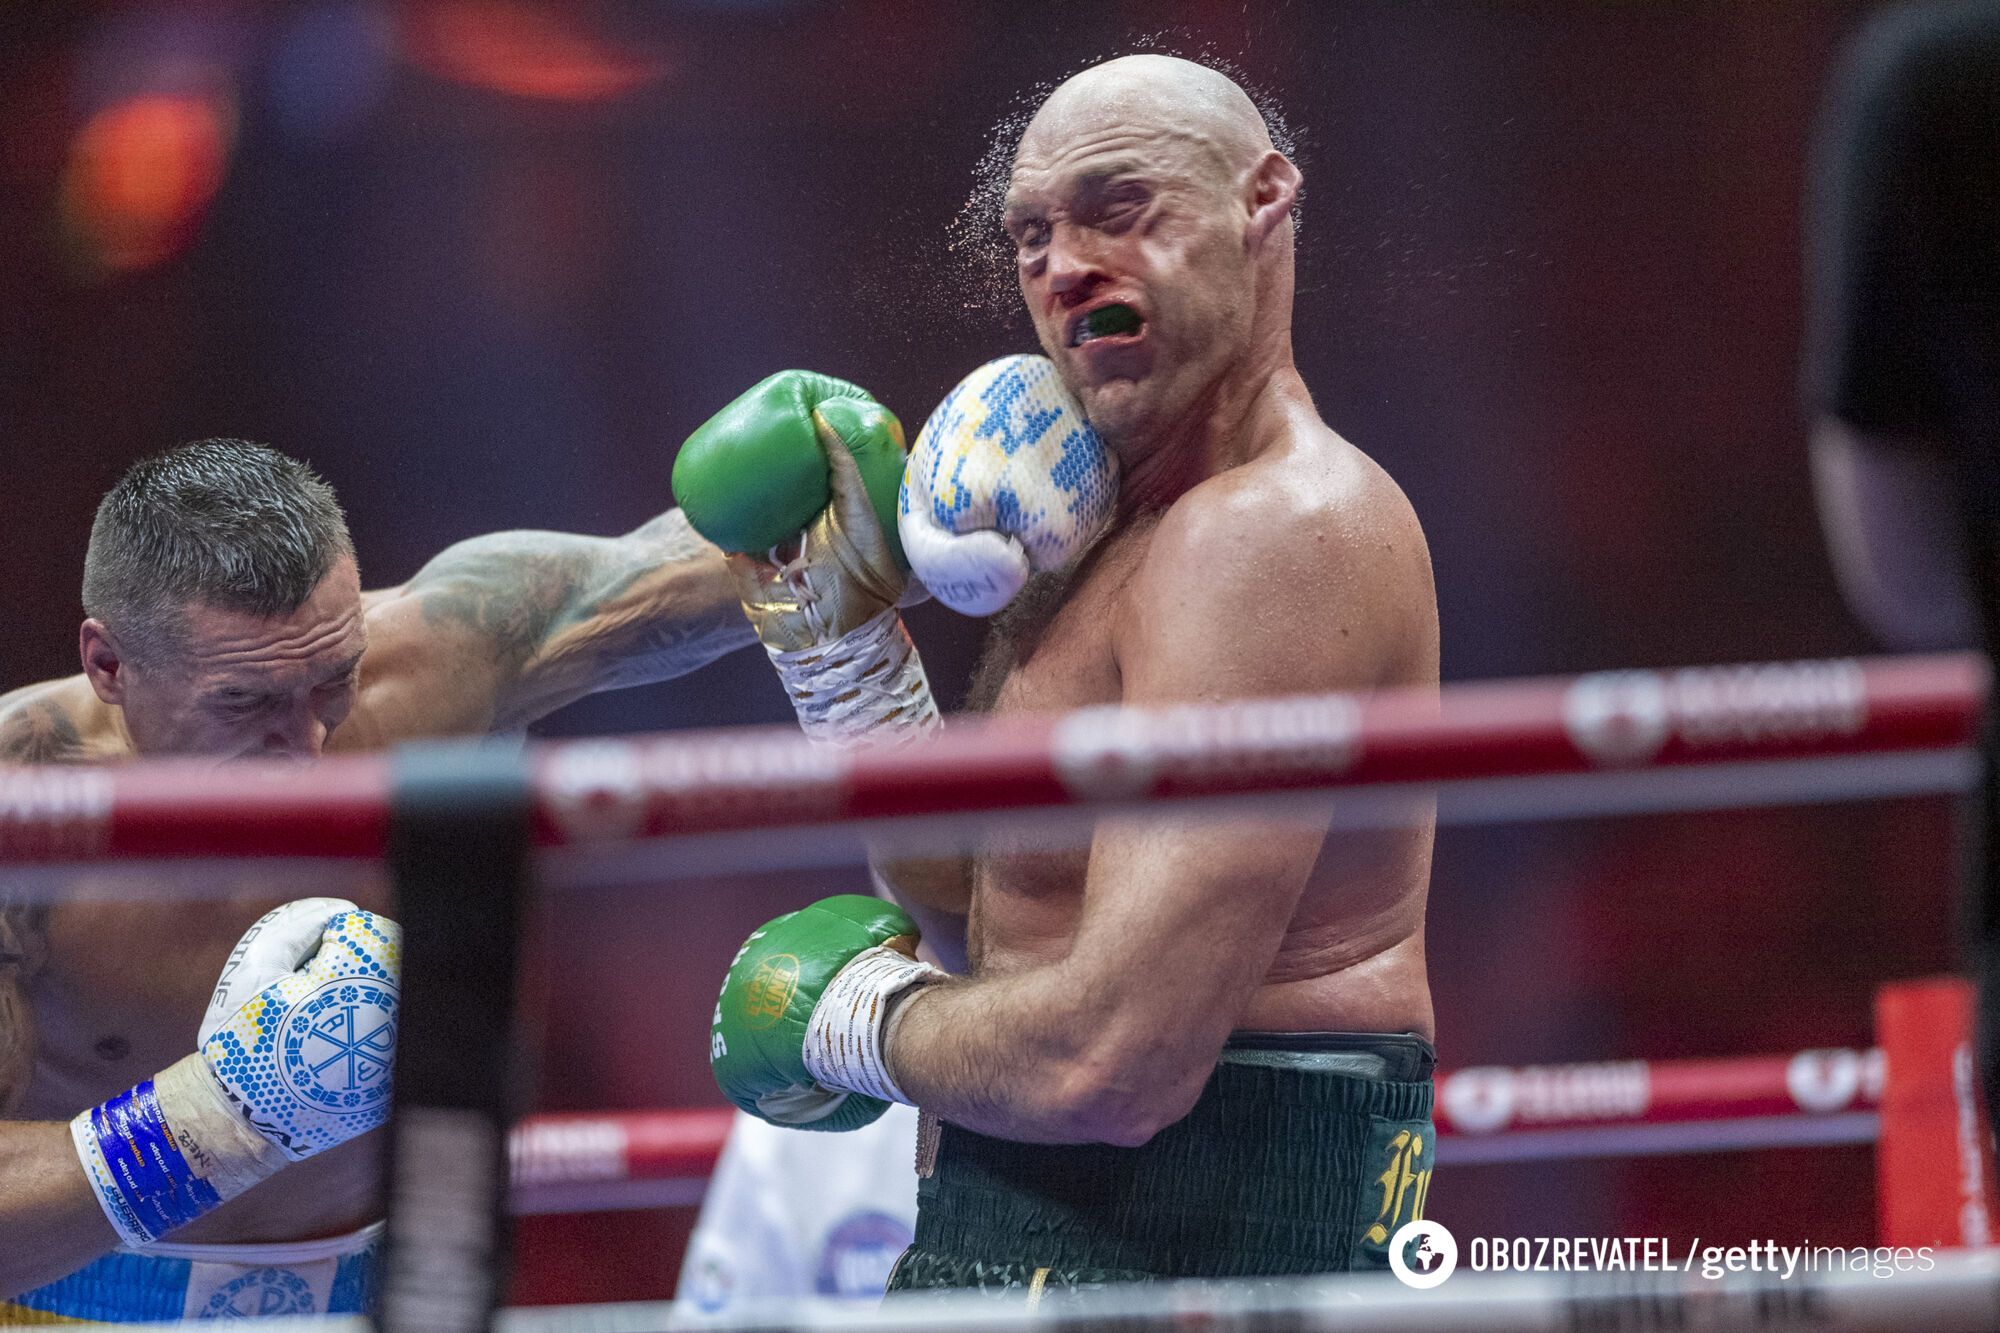 The results of Usyk and Fury's doping tests after the fight have been revealed